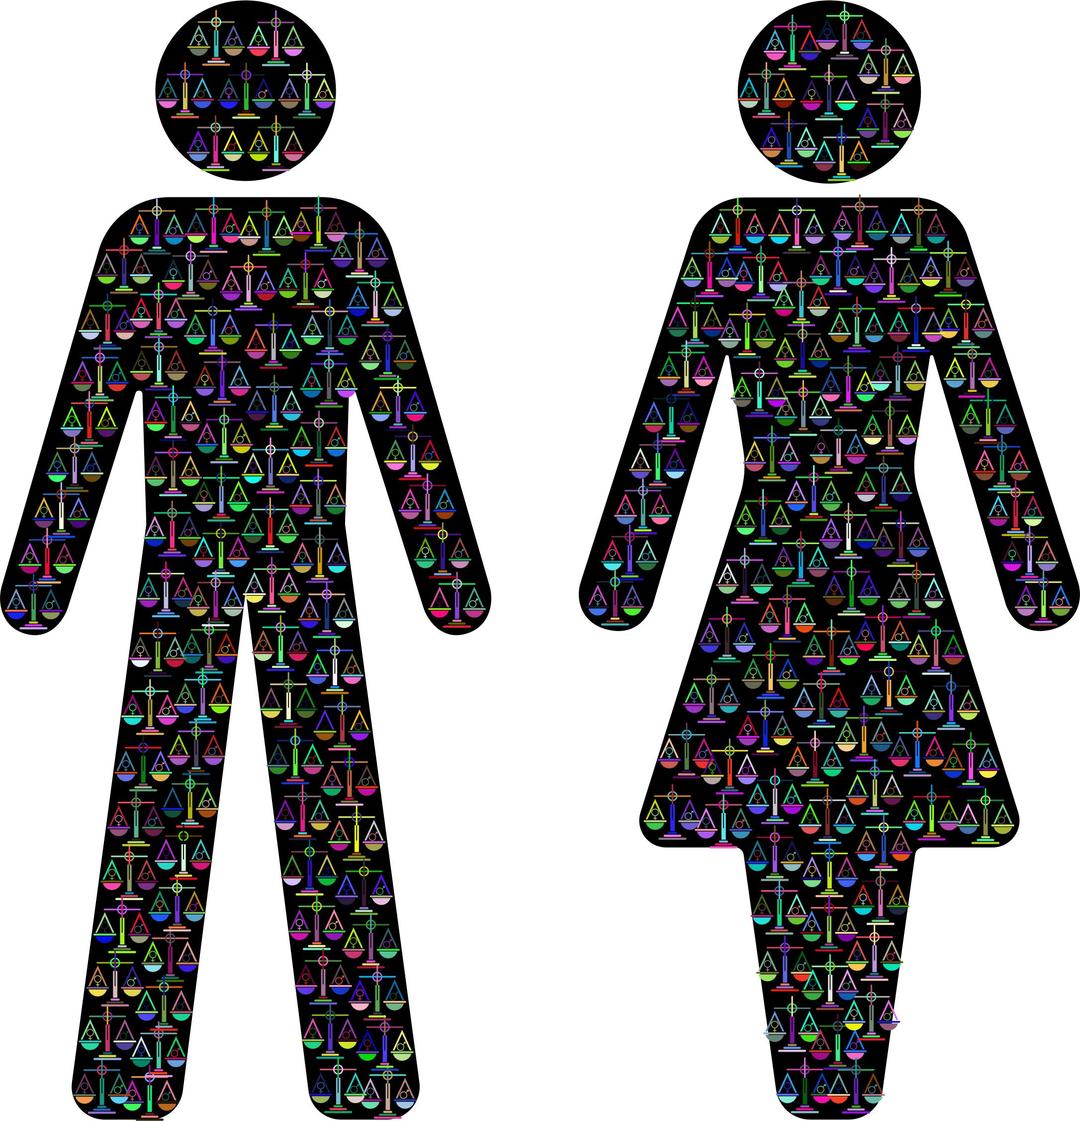 Prismatic Gender Equality Male And Female Figures 2 png transparent